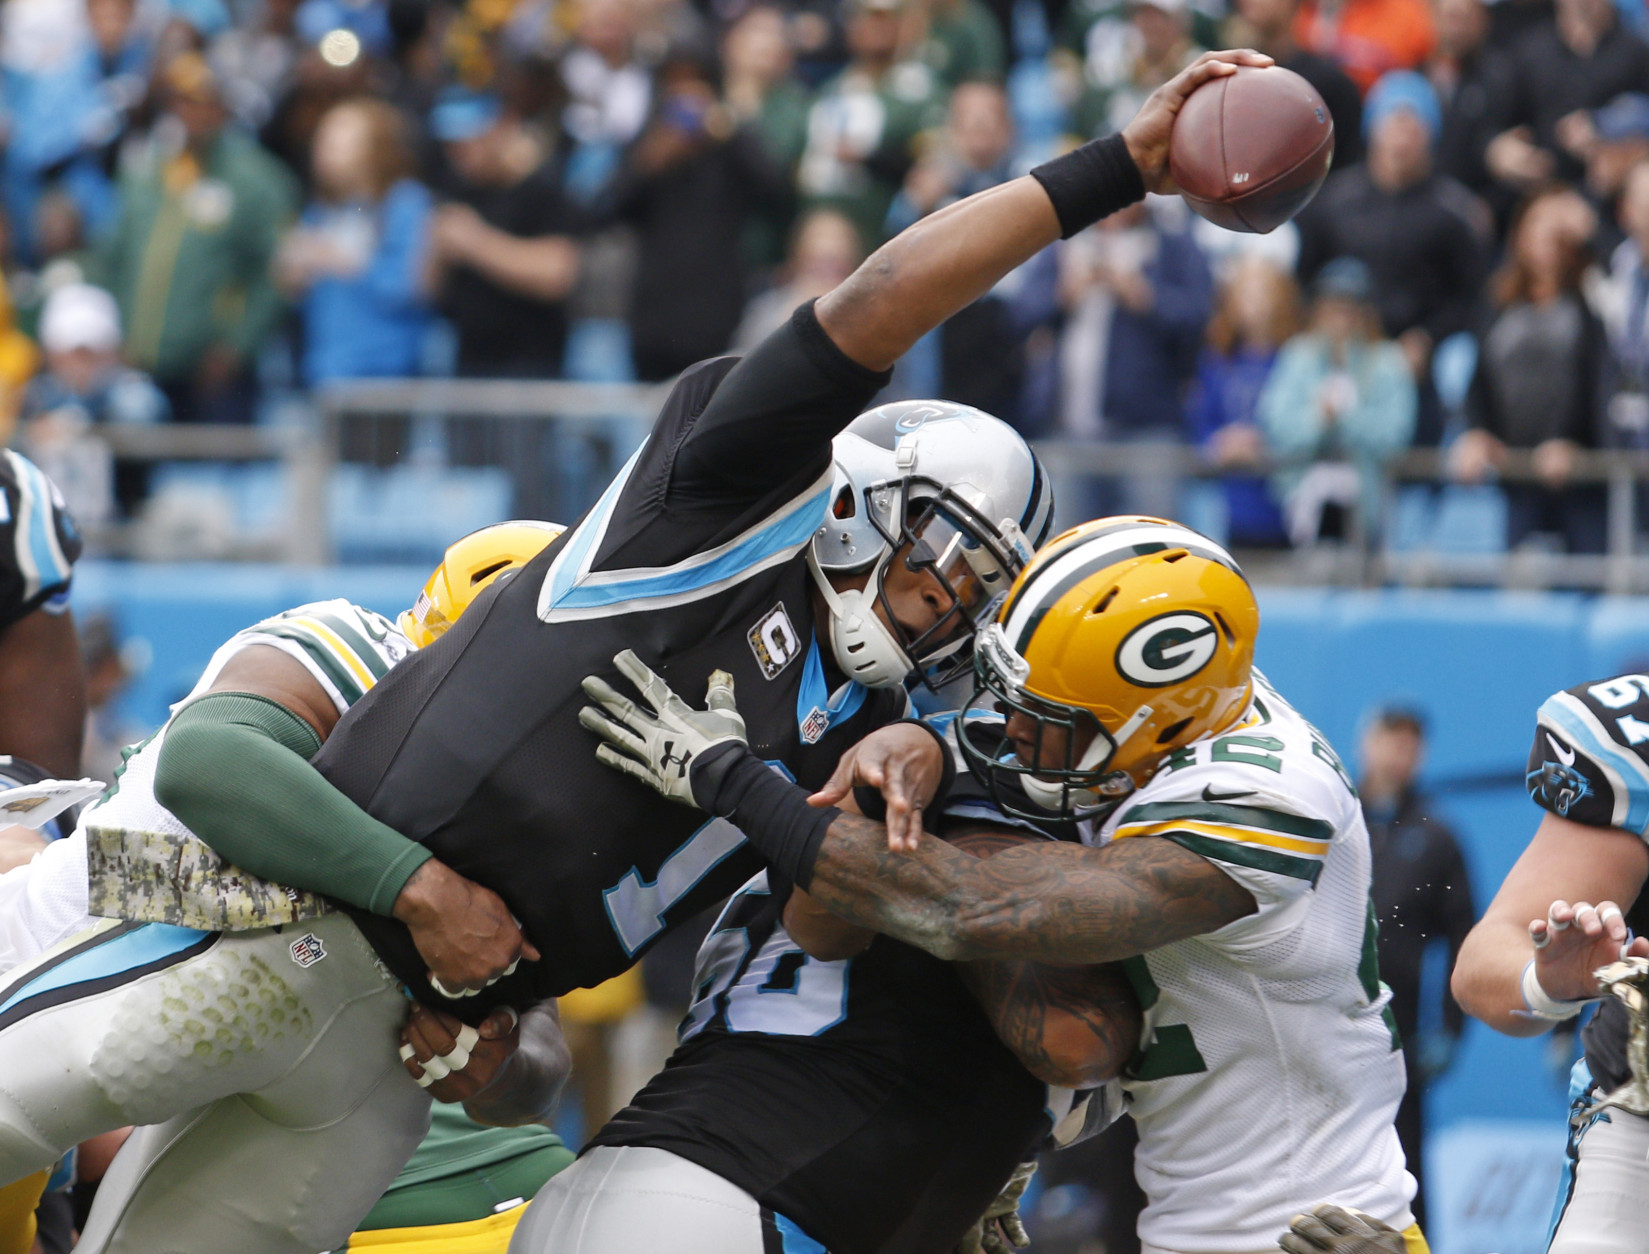 Carolina Panthers' Cam Newton (1) reaches the ball over the goal line for a touchdown against the Green Bay Packers in the first half of an NFL football game in Charlotte, N.C., Sunday, Nov. 8, 2015. (AP Photo/Bob Leverone)